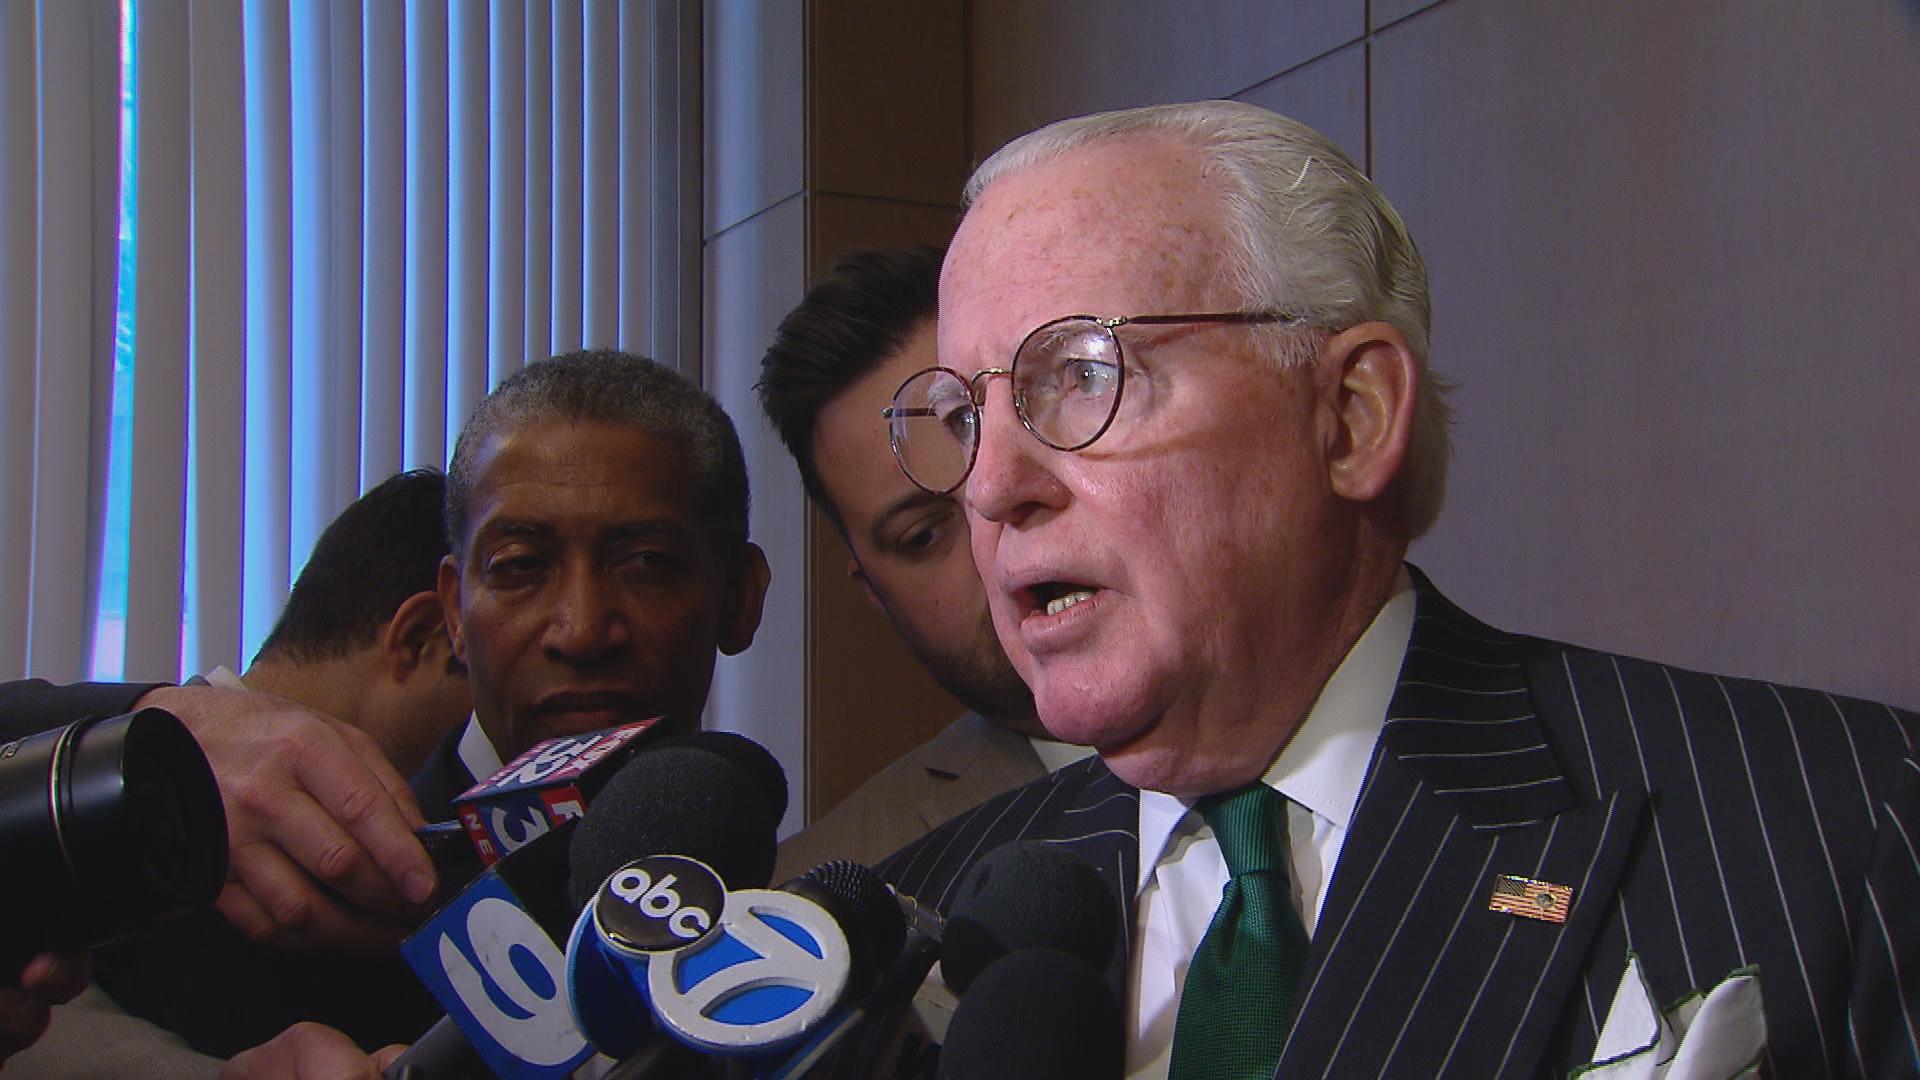 Ald. Ed Burke (14th Ward): “We’re the best and the busiest air hub in the nation, and people who are flying out of Chicago, whether it's O'Hare or Midway, shouldn't be subjected to the kind of hardships that they are today, because of the ineptitude of the TSA.”